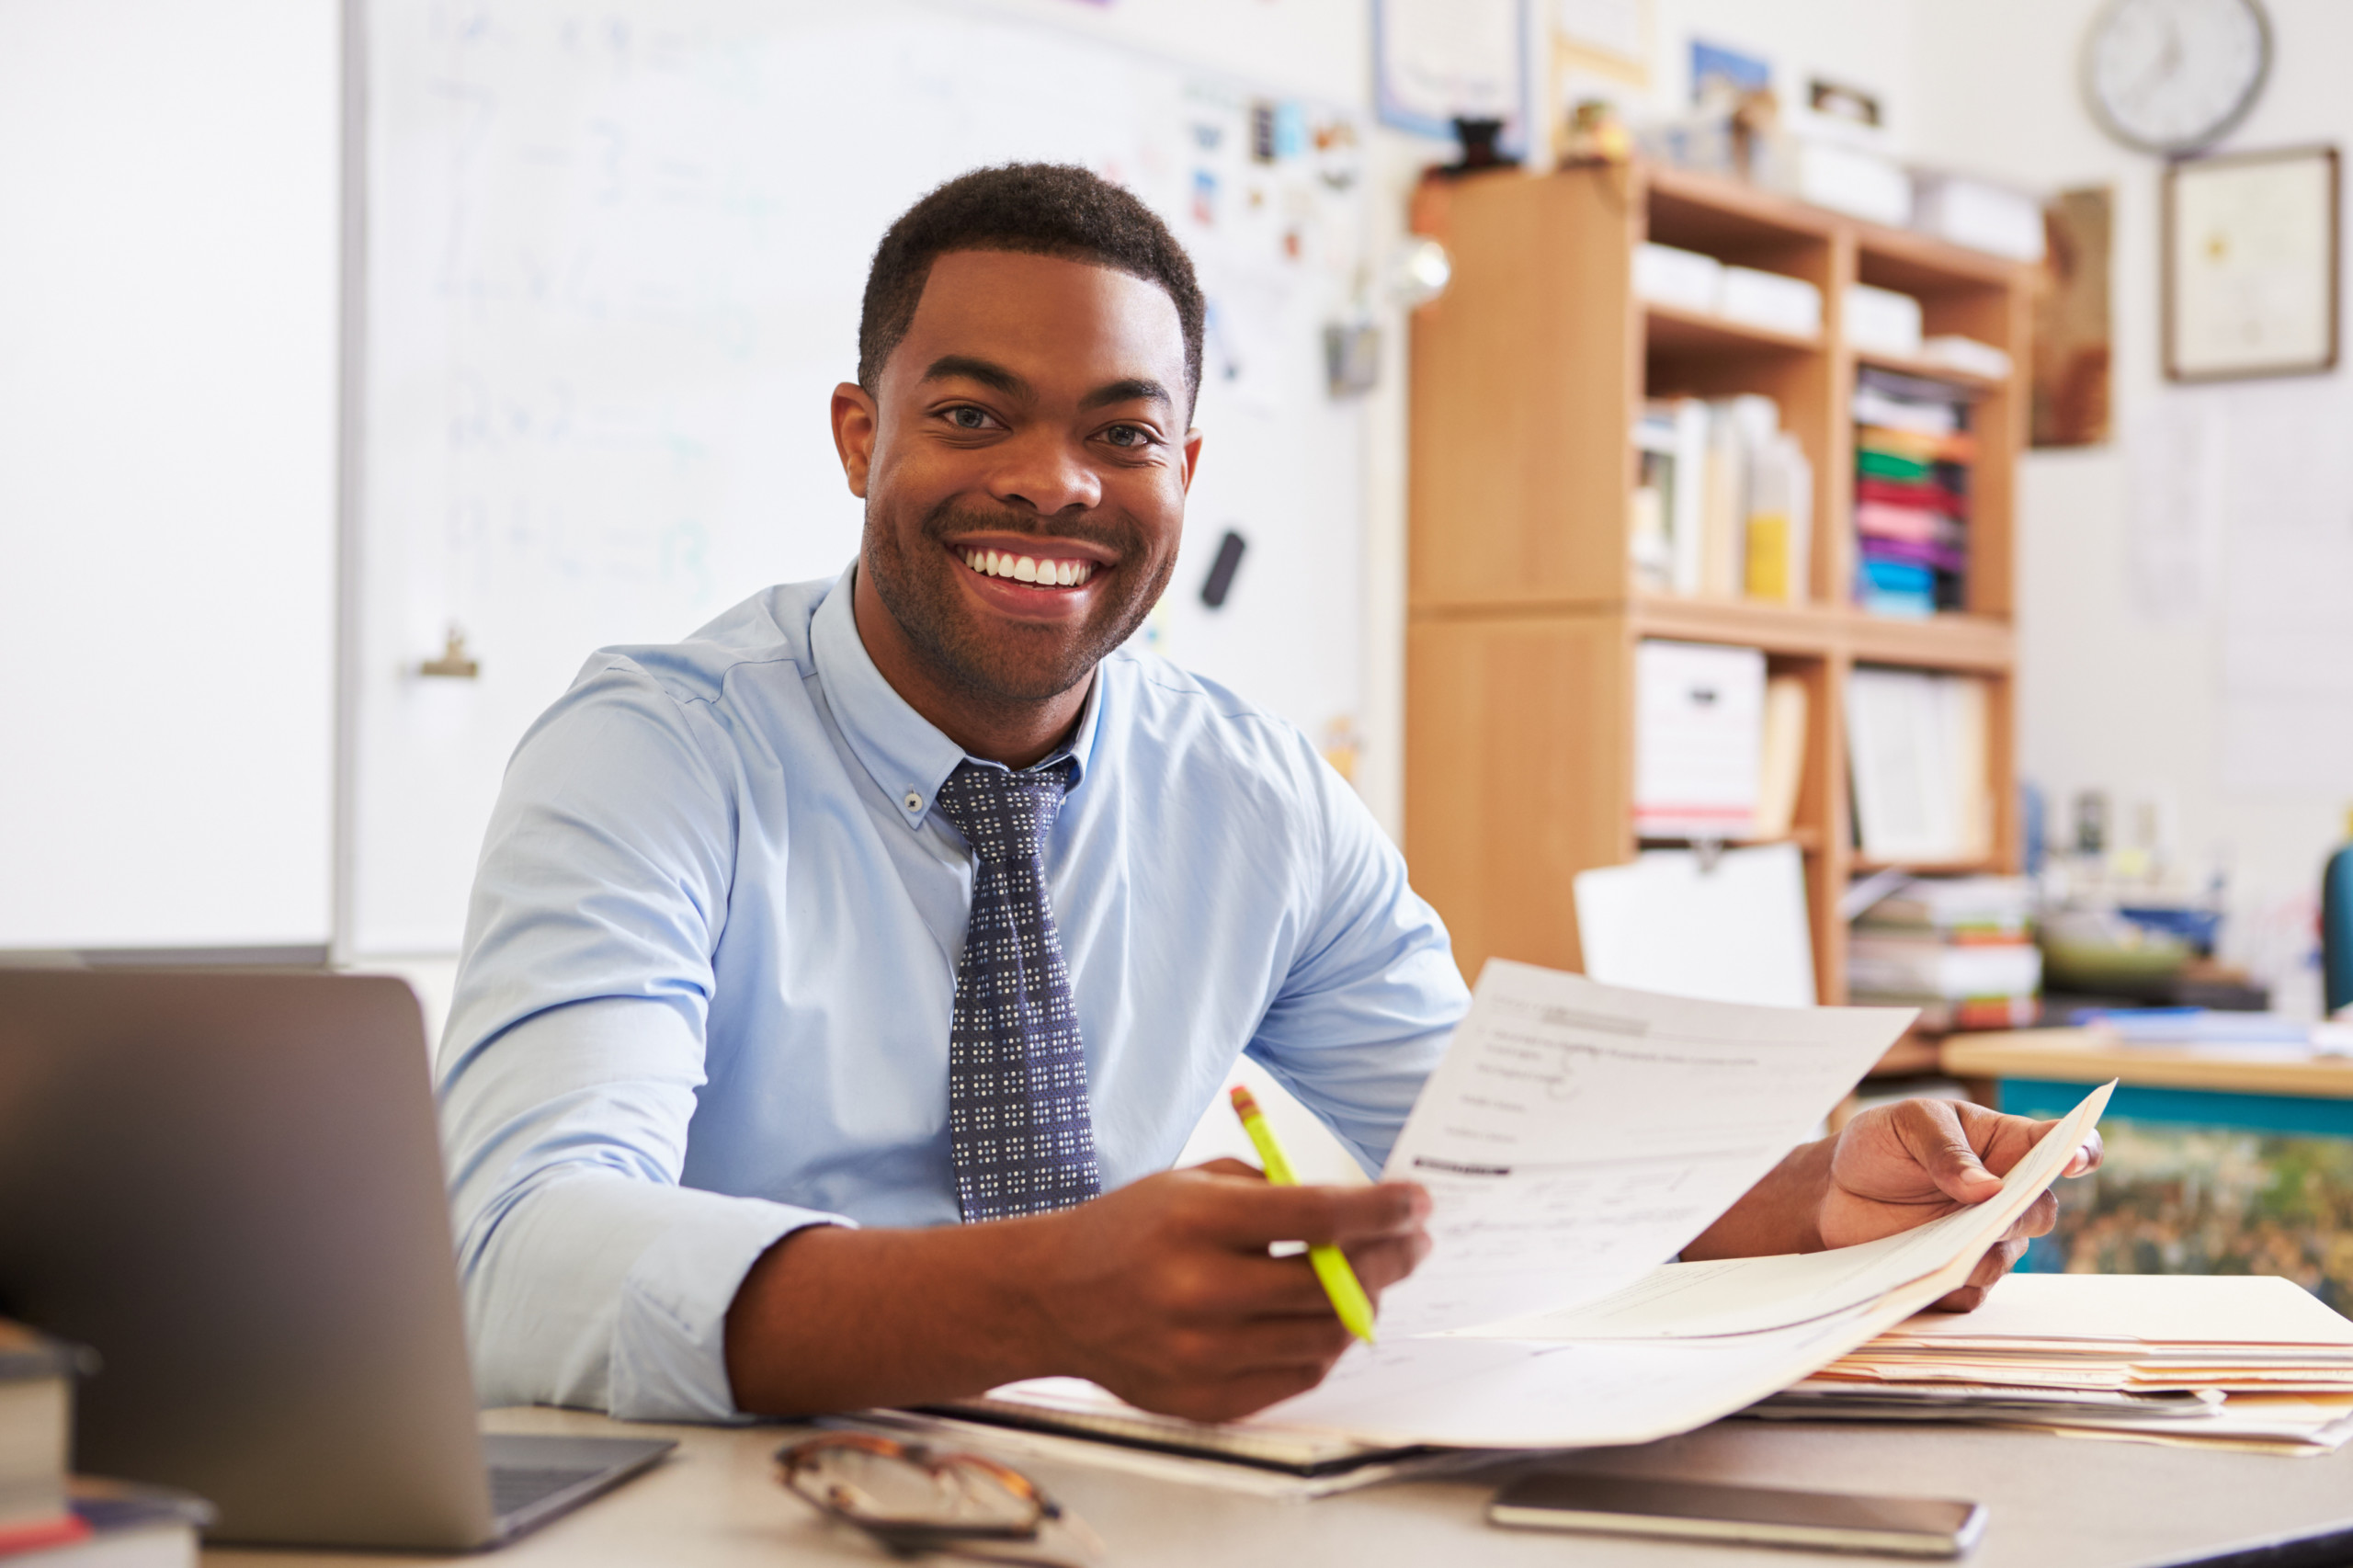 Portrait of African American male teacher working at desk